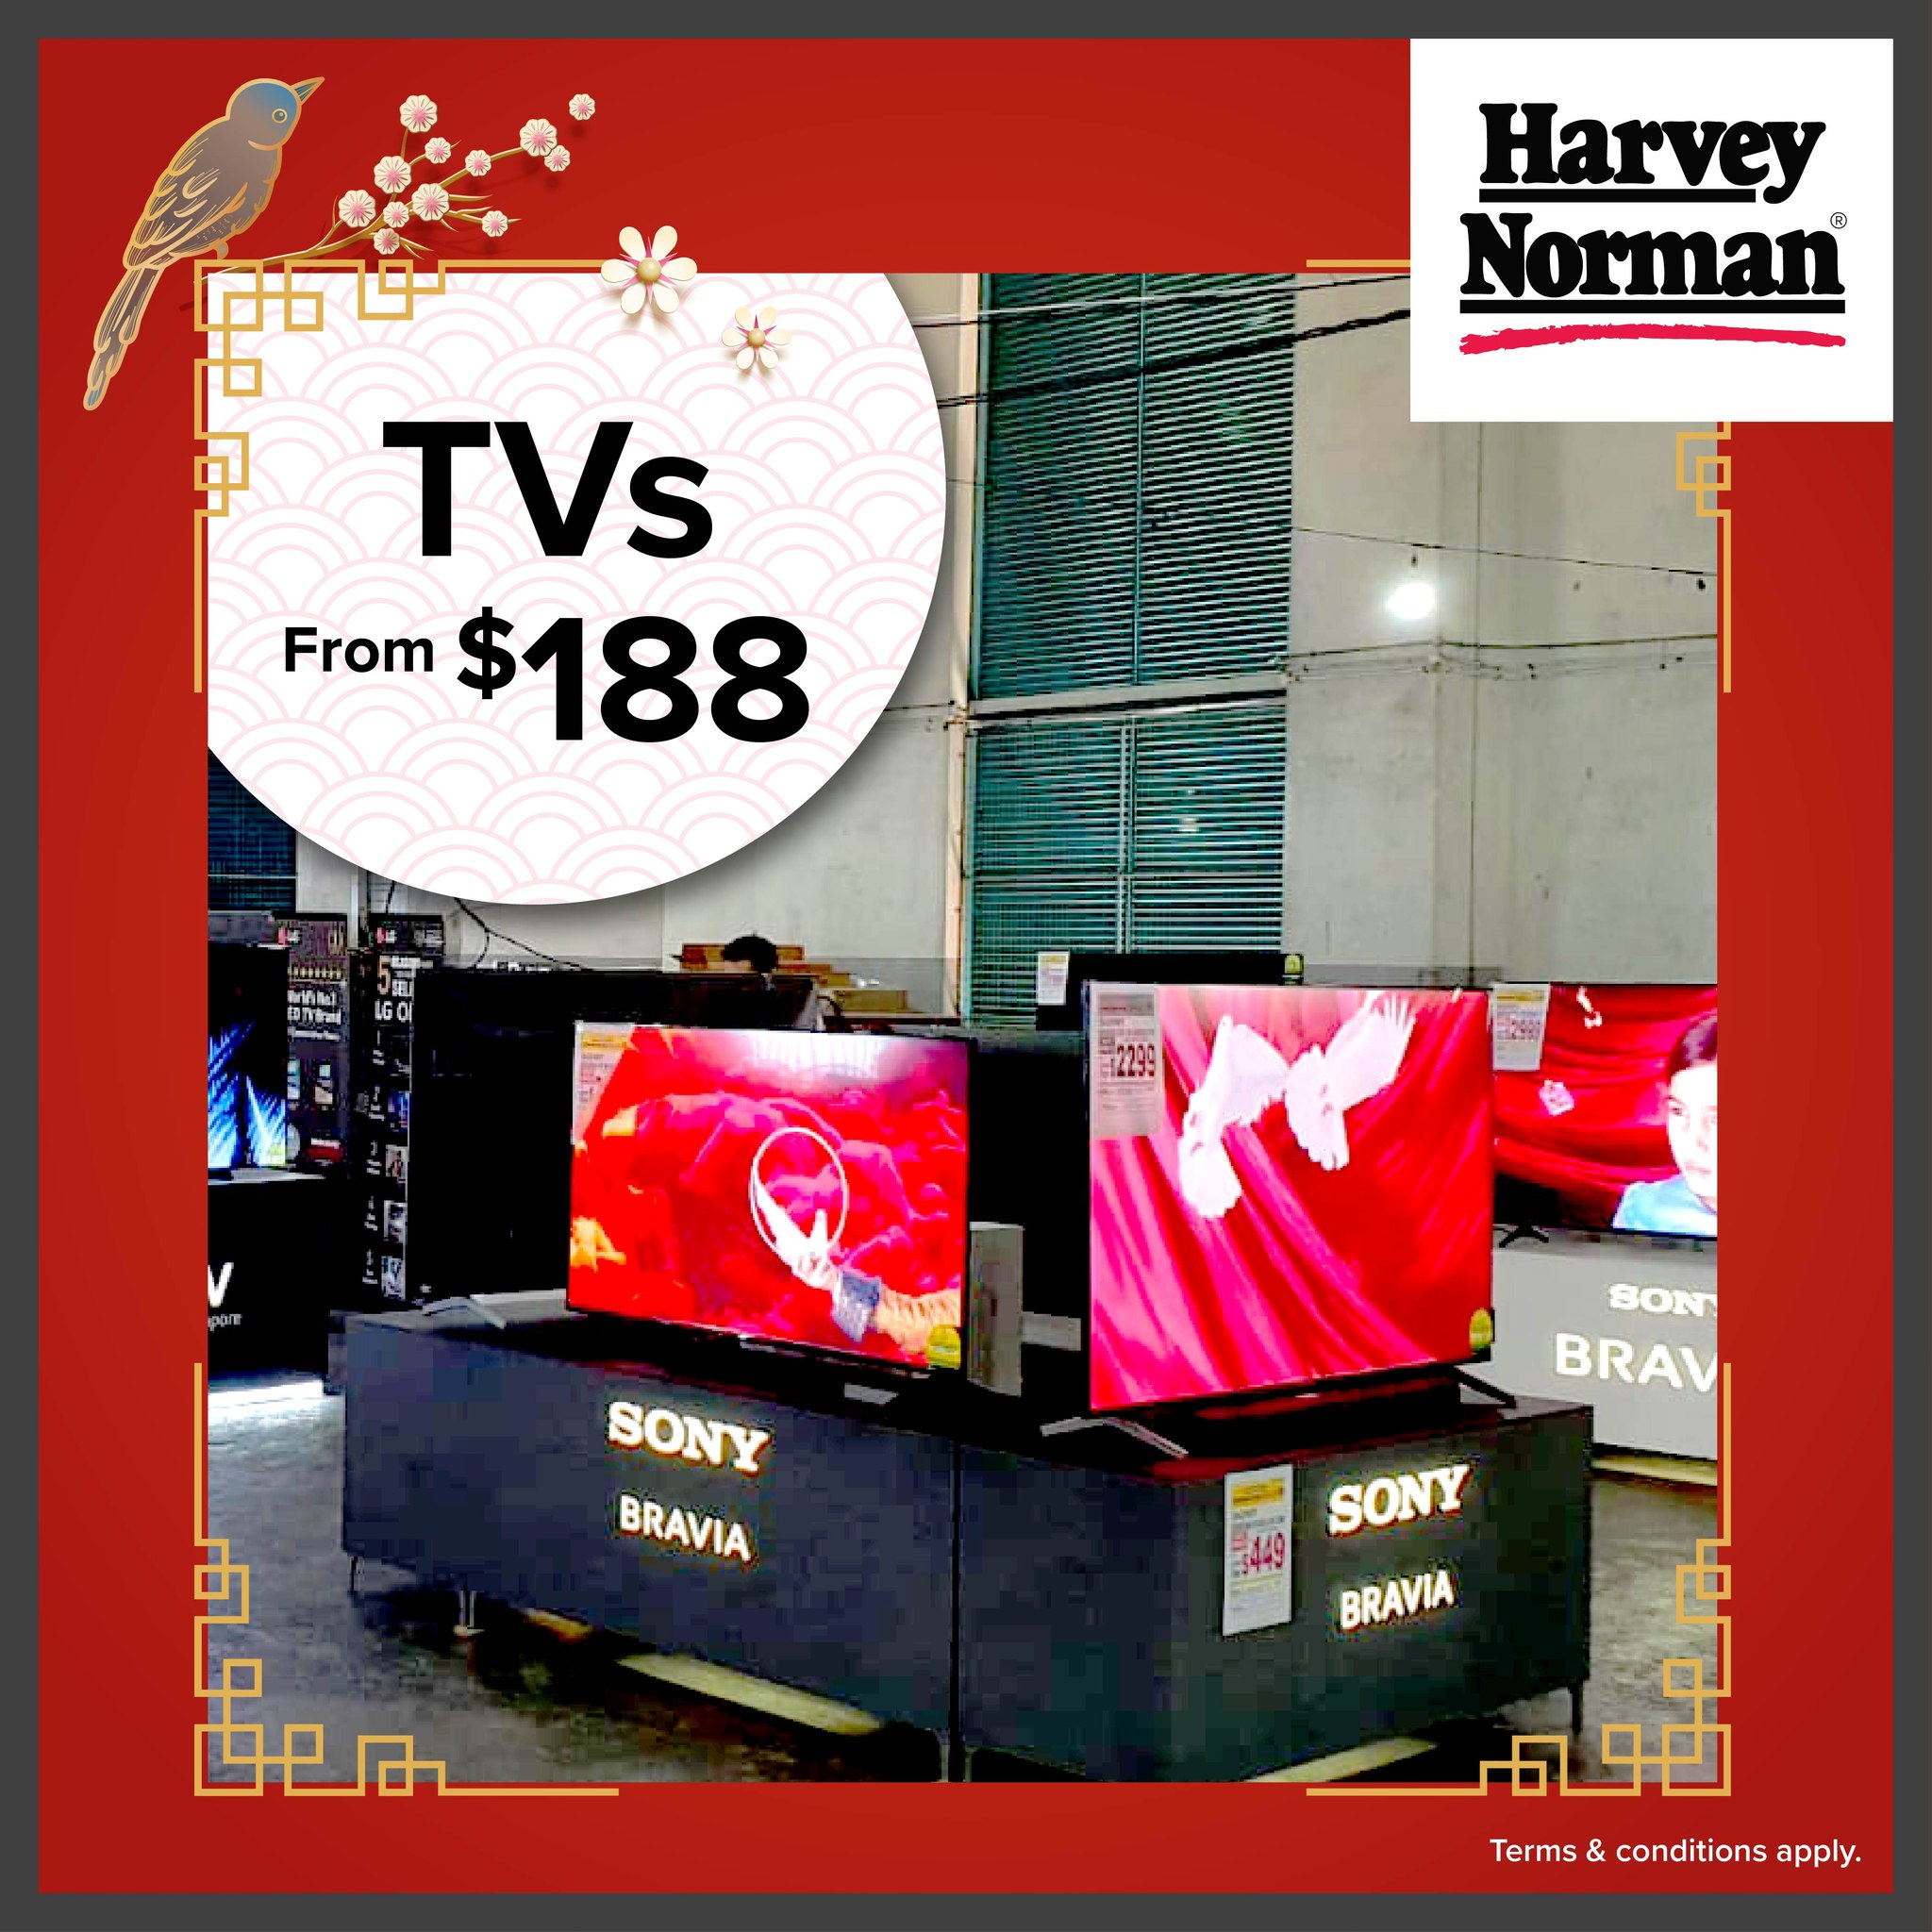 Lobang: Harvey Norman Warehouse Sale Has TVs from $188, Mattresses from $88, Furniture from $25 and more (6 - 8 Jan 23) - 11